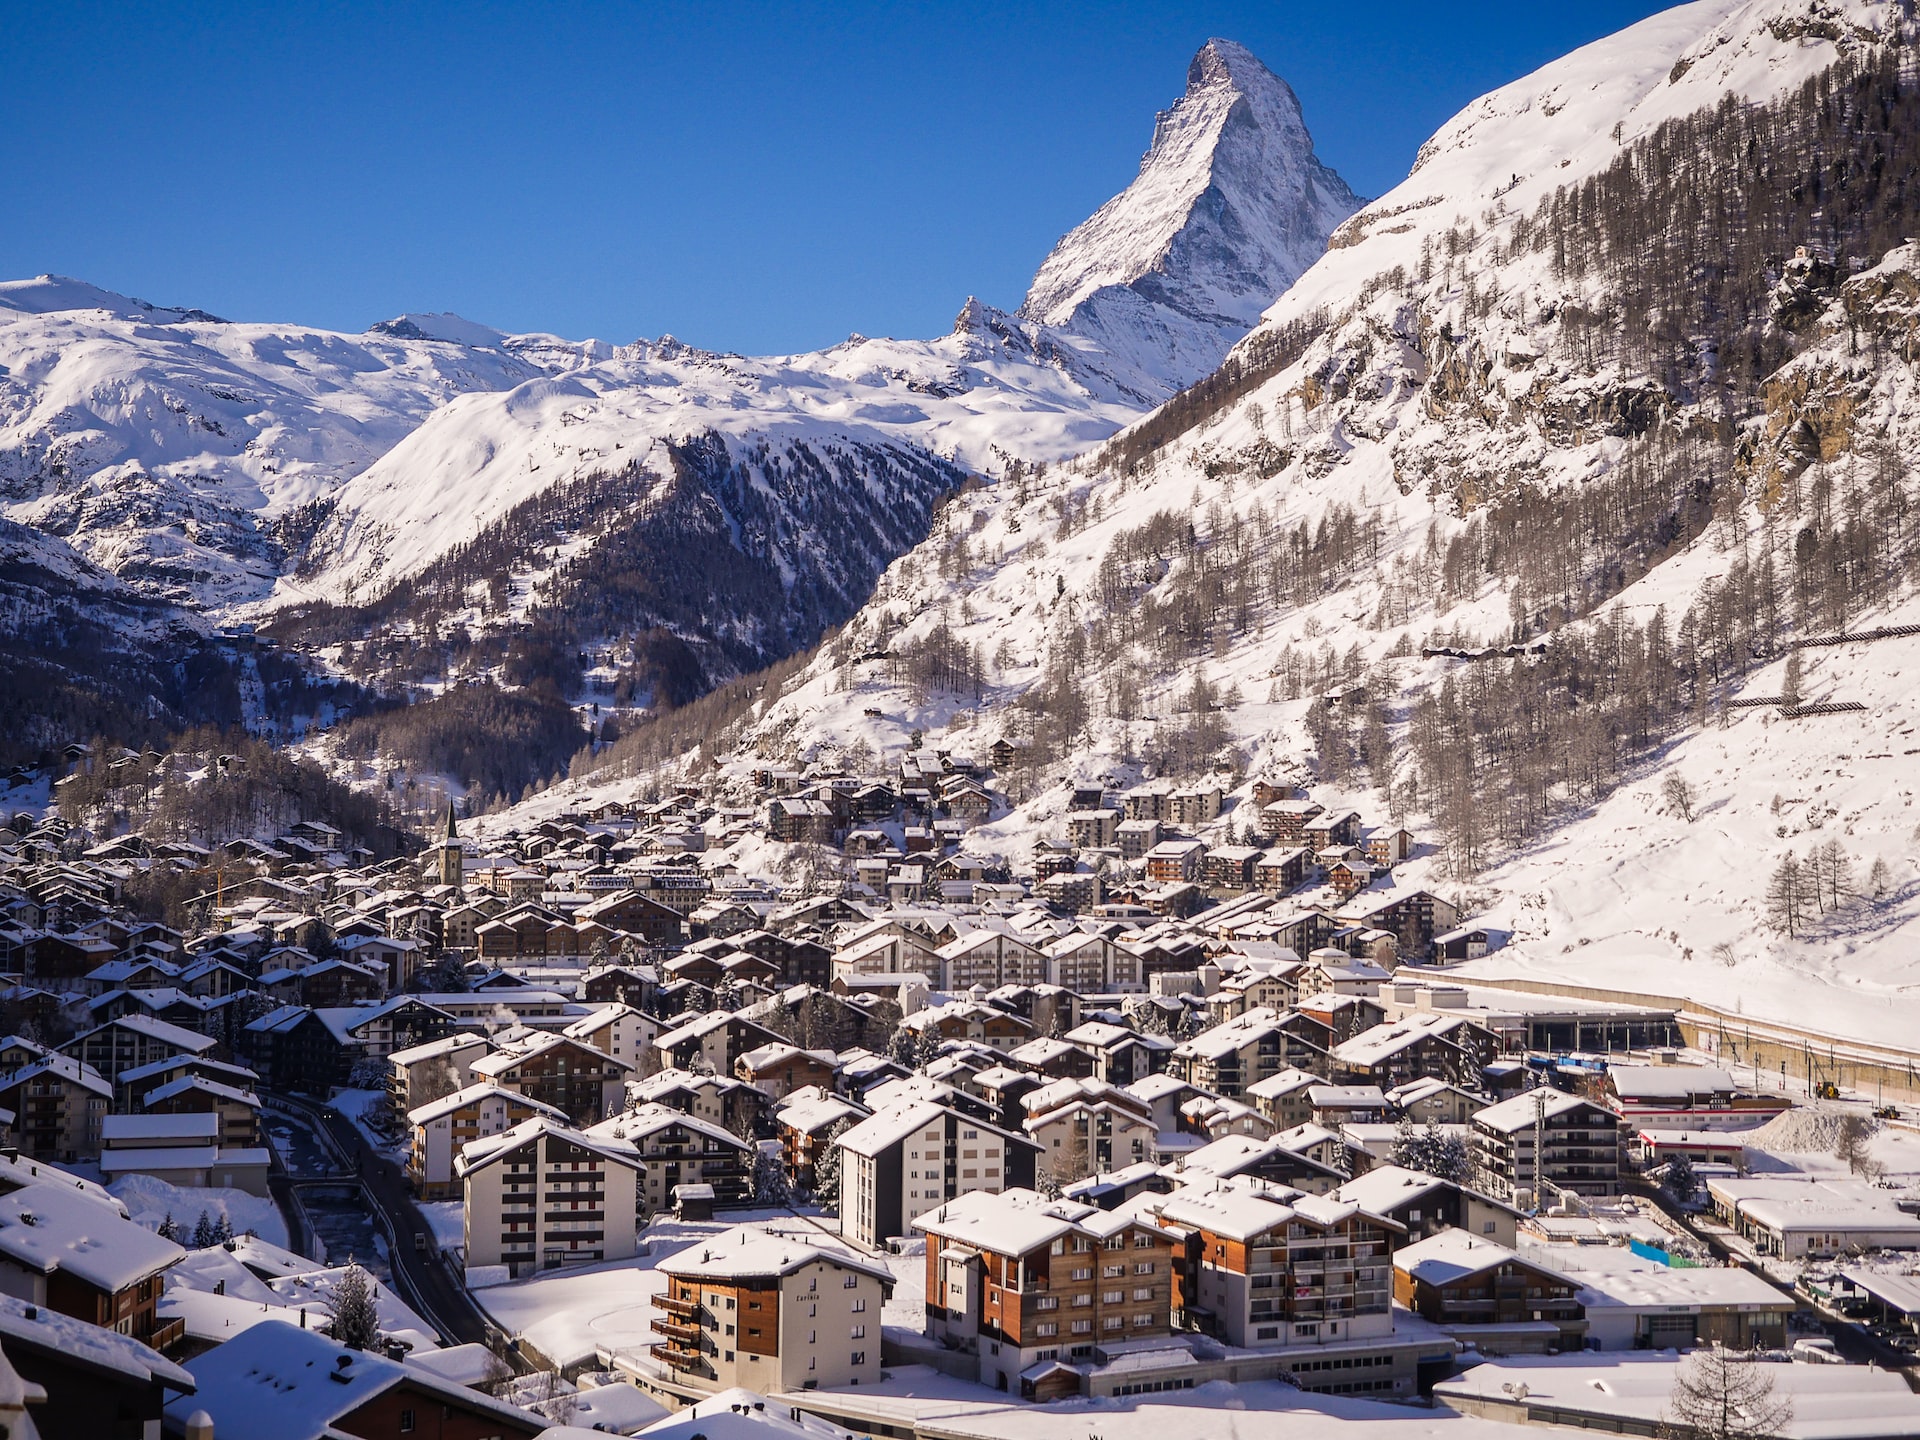 Zermatt covered in snow with the Matterhorn visible in the distance.